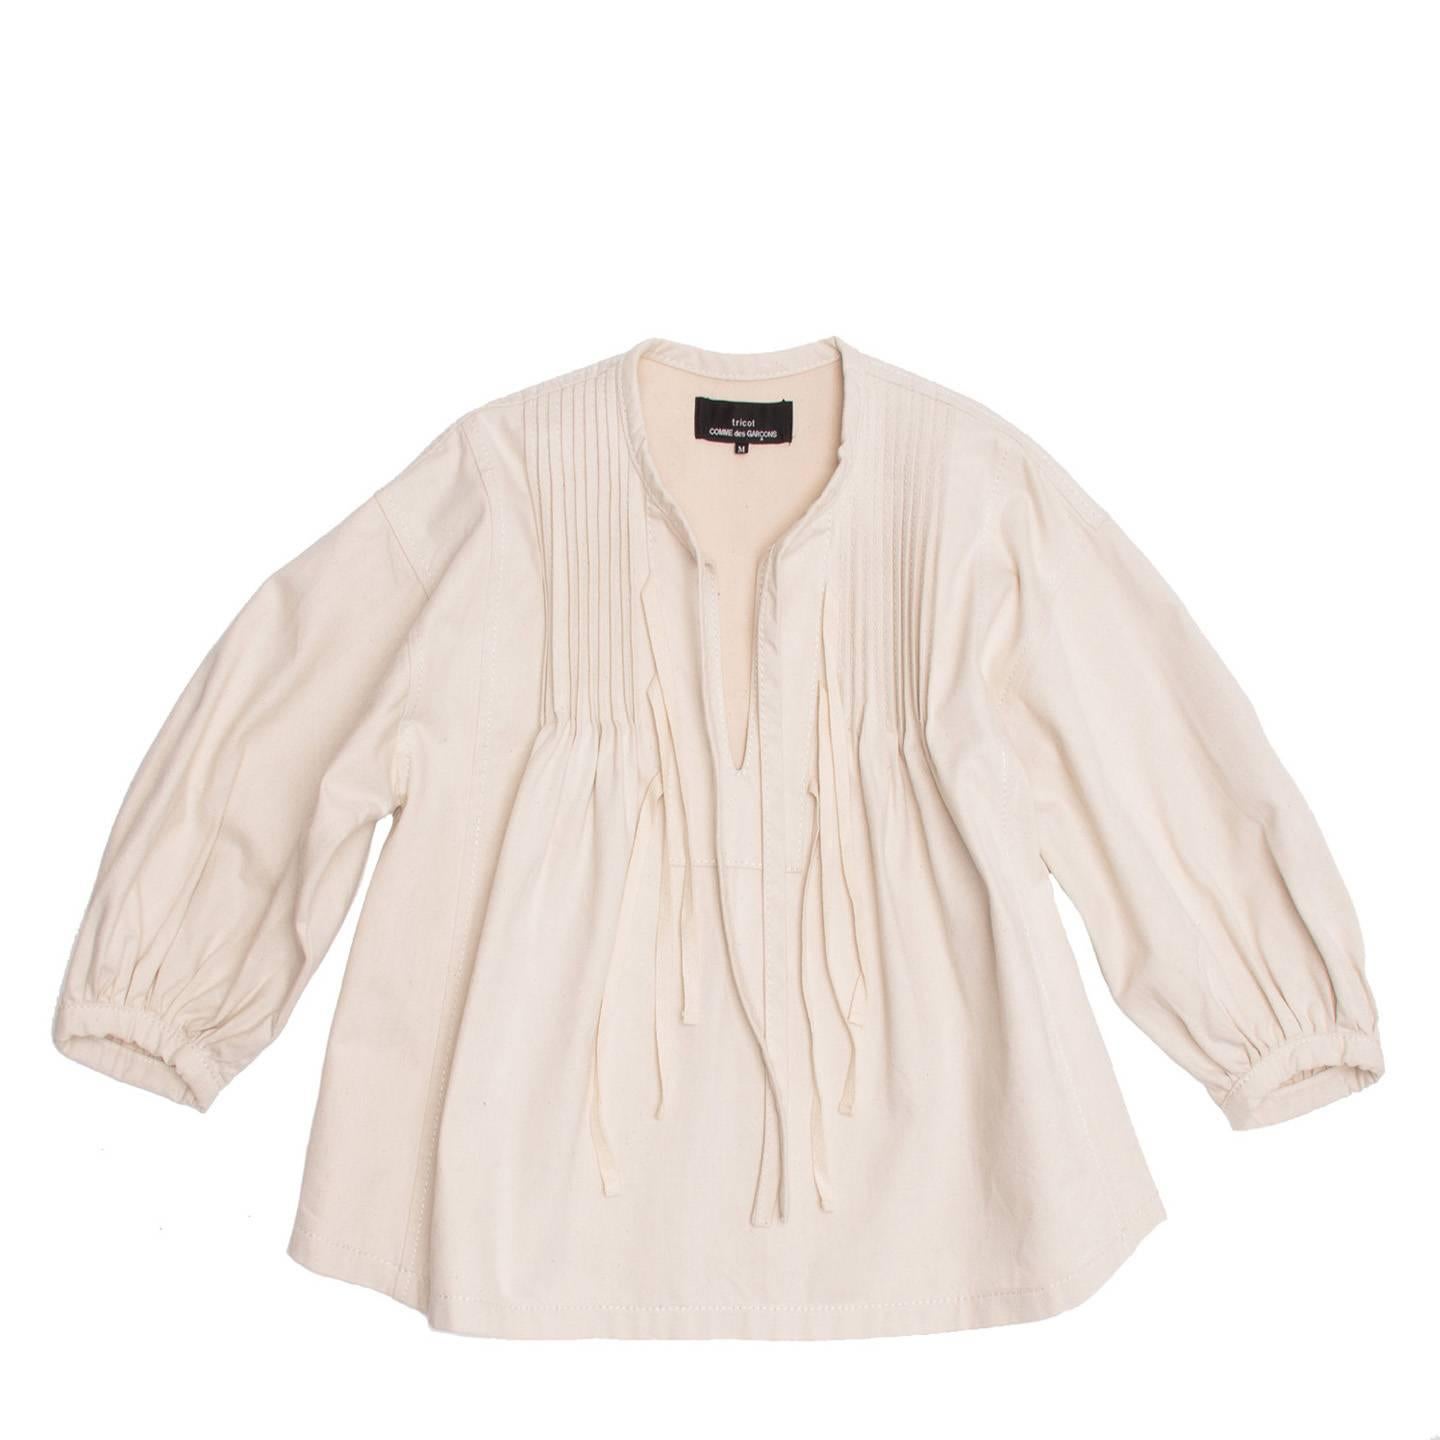 Natural color thick cotton cropped blouse with fixed pleats at top front that create an A-volume. The top is collarless and the biding on its edge ends hanging at the front. More thin ribbons dangle at the front opening. The armhole is wide and